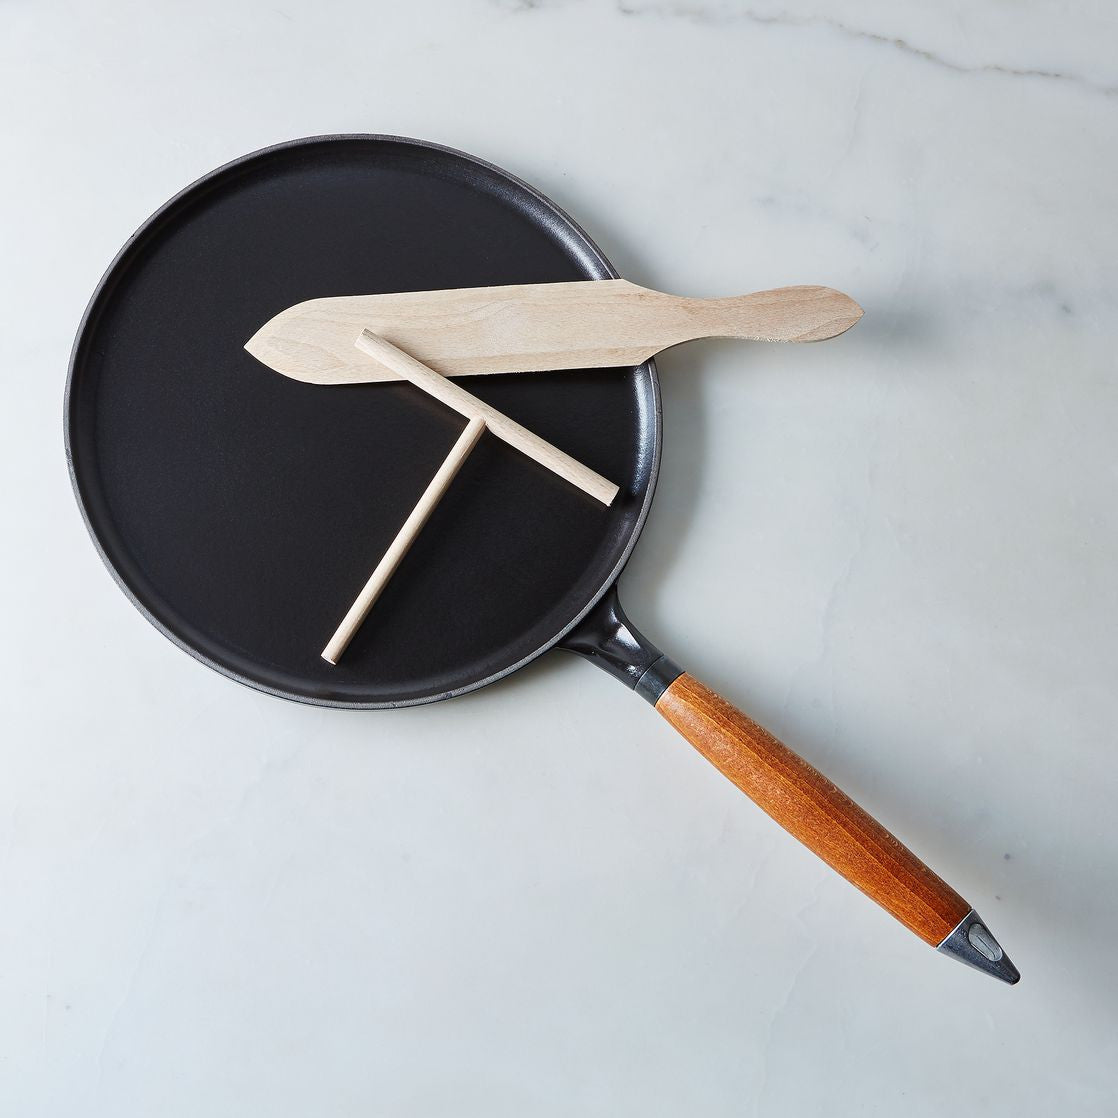 Staub 11 Crepe Pan with Spreader & Spatula -Matte Black - Jane Leslie and  Co.